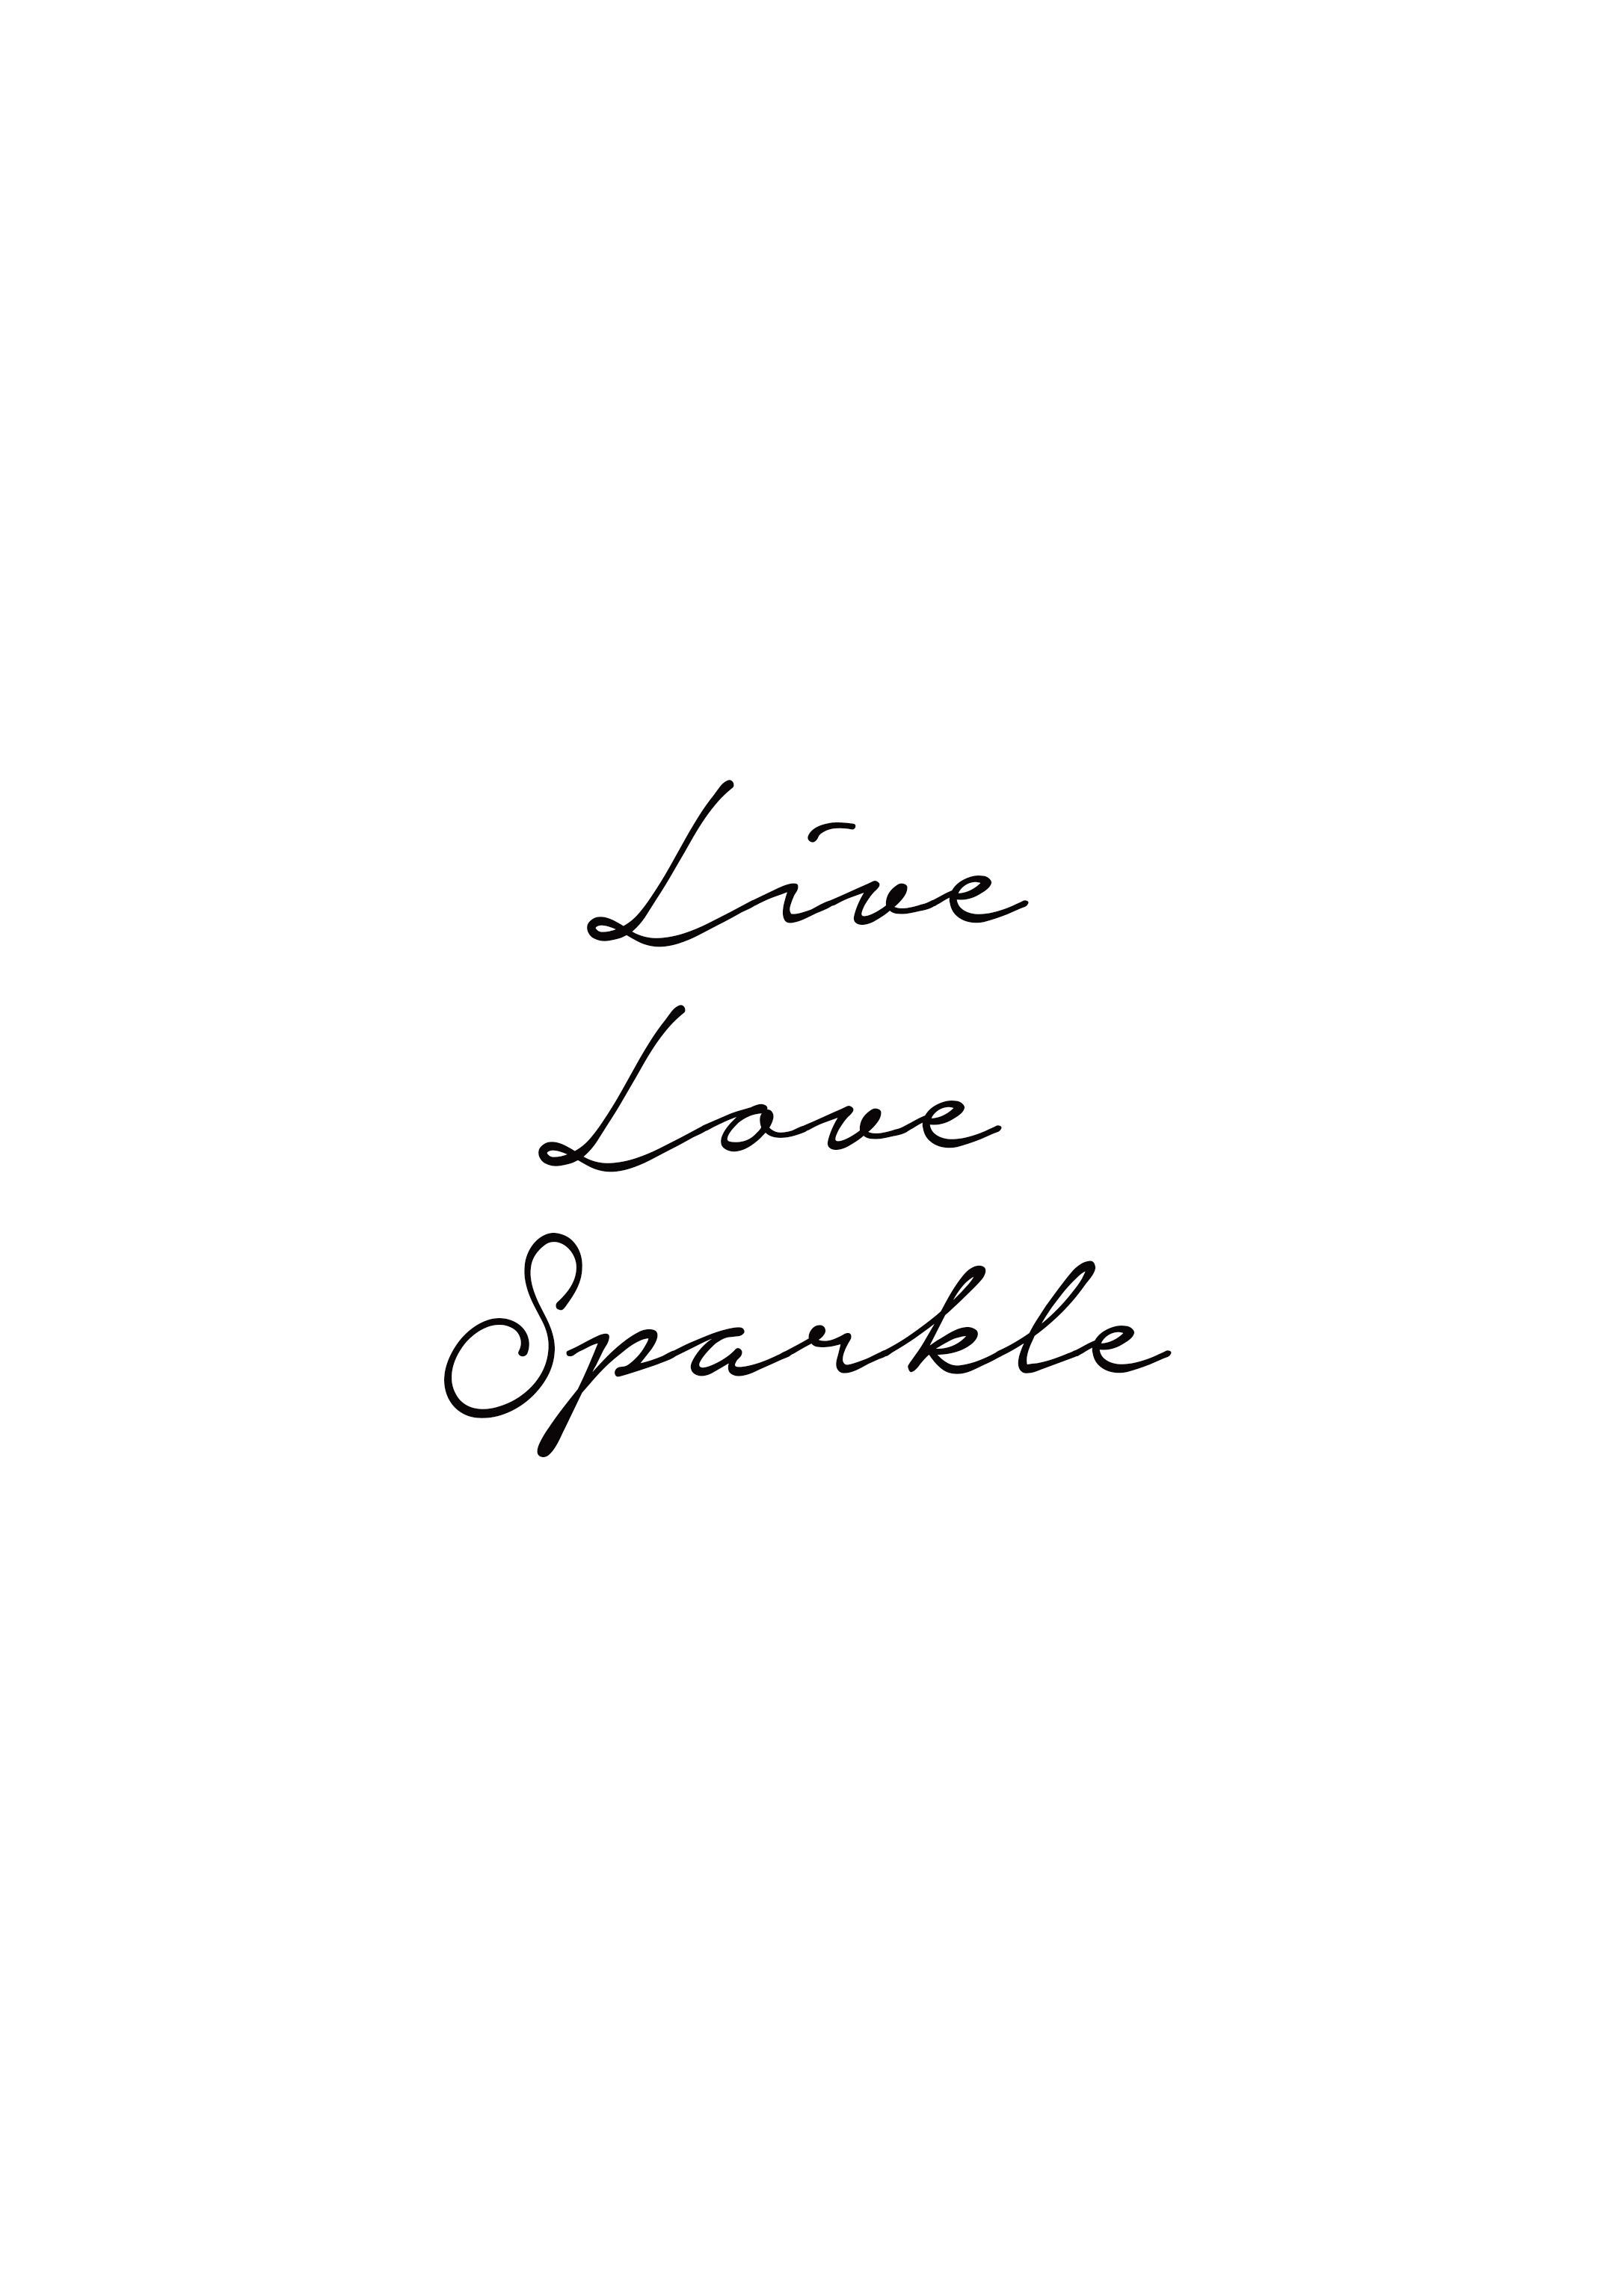 This is exactly what wording I was thinking live love sparkle…